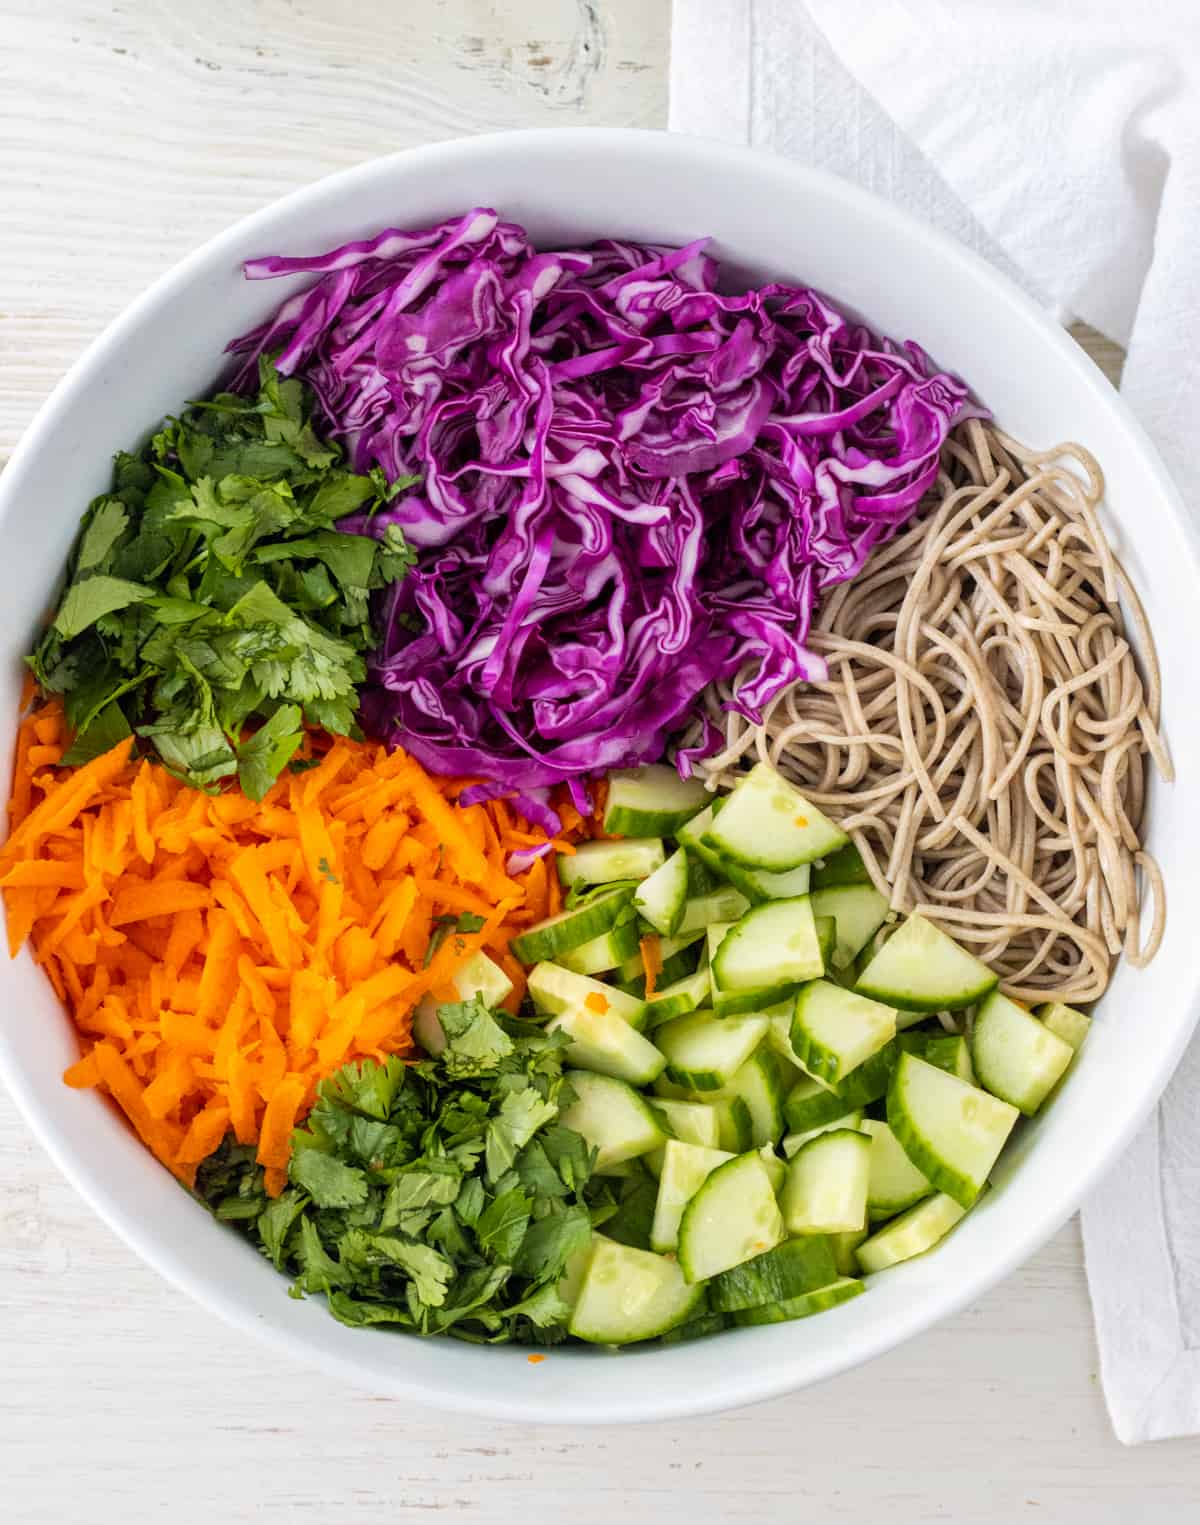 Sliced purple cabbage, sliced cucumbers, shredded carrots, and chopped parsley and cilantro in a large bowl with soba noodles.